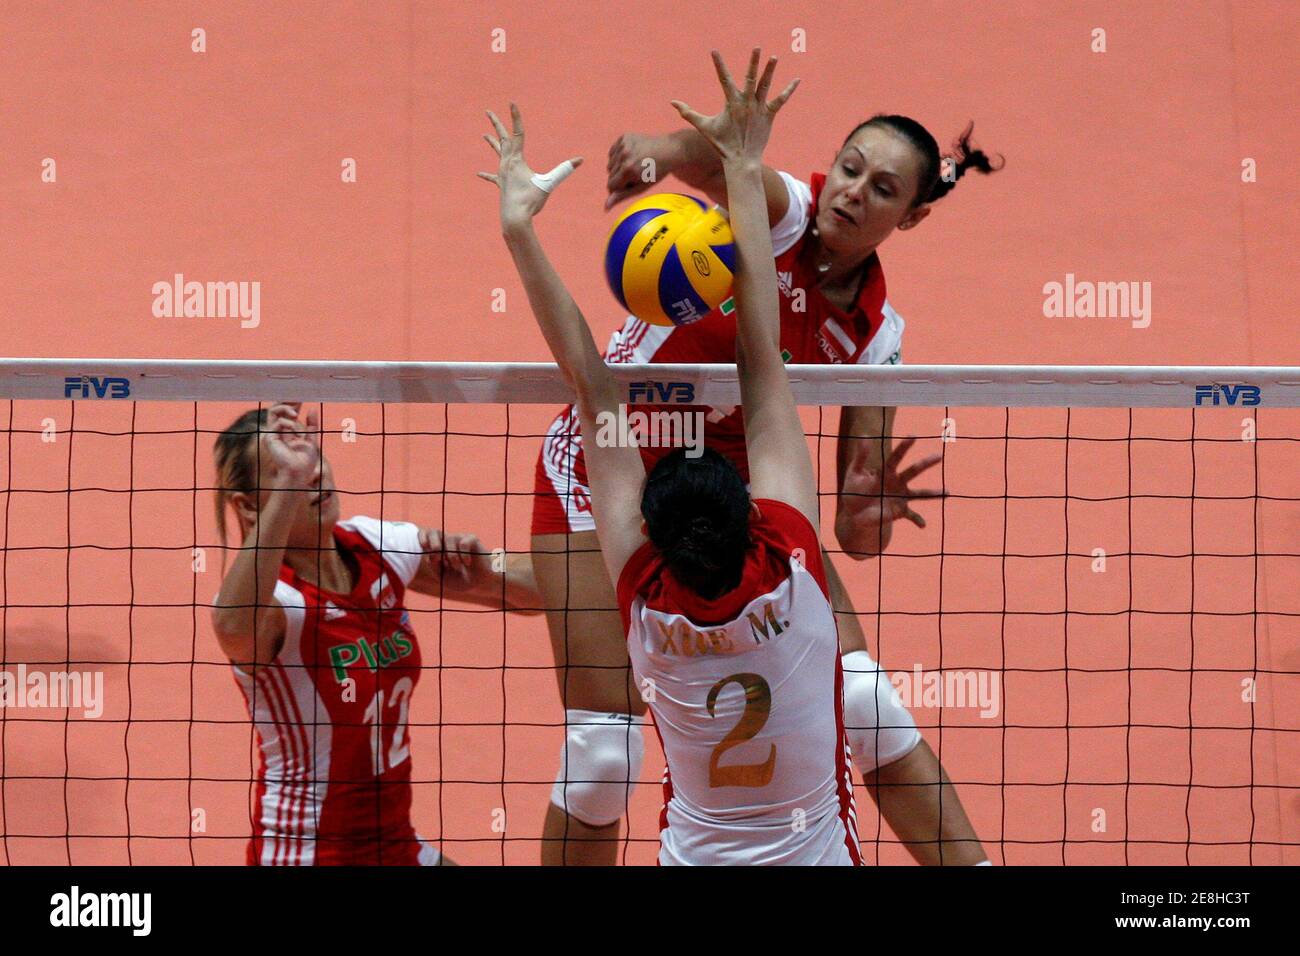 Dorota Pykosz (top R) and Milena Sadurek Mikolajczyk (top L) of Poland spike the ball against Xue Ming of China during their FIVB World Grand Prix women's volleyball tournament in Hong Kong August 15, 2009. REUTERS/Tyrone Siu    (CHINA SPORT VOLLEYBALL) Stock Photo